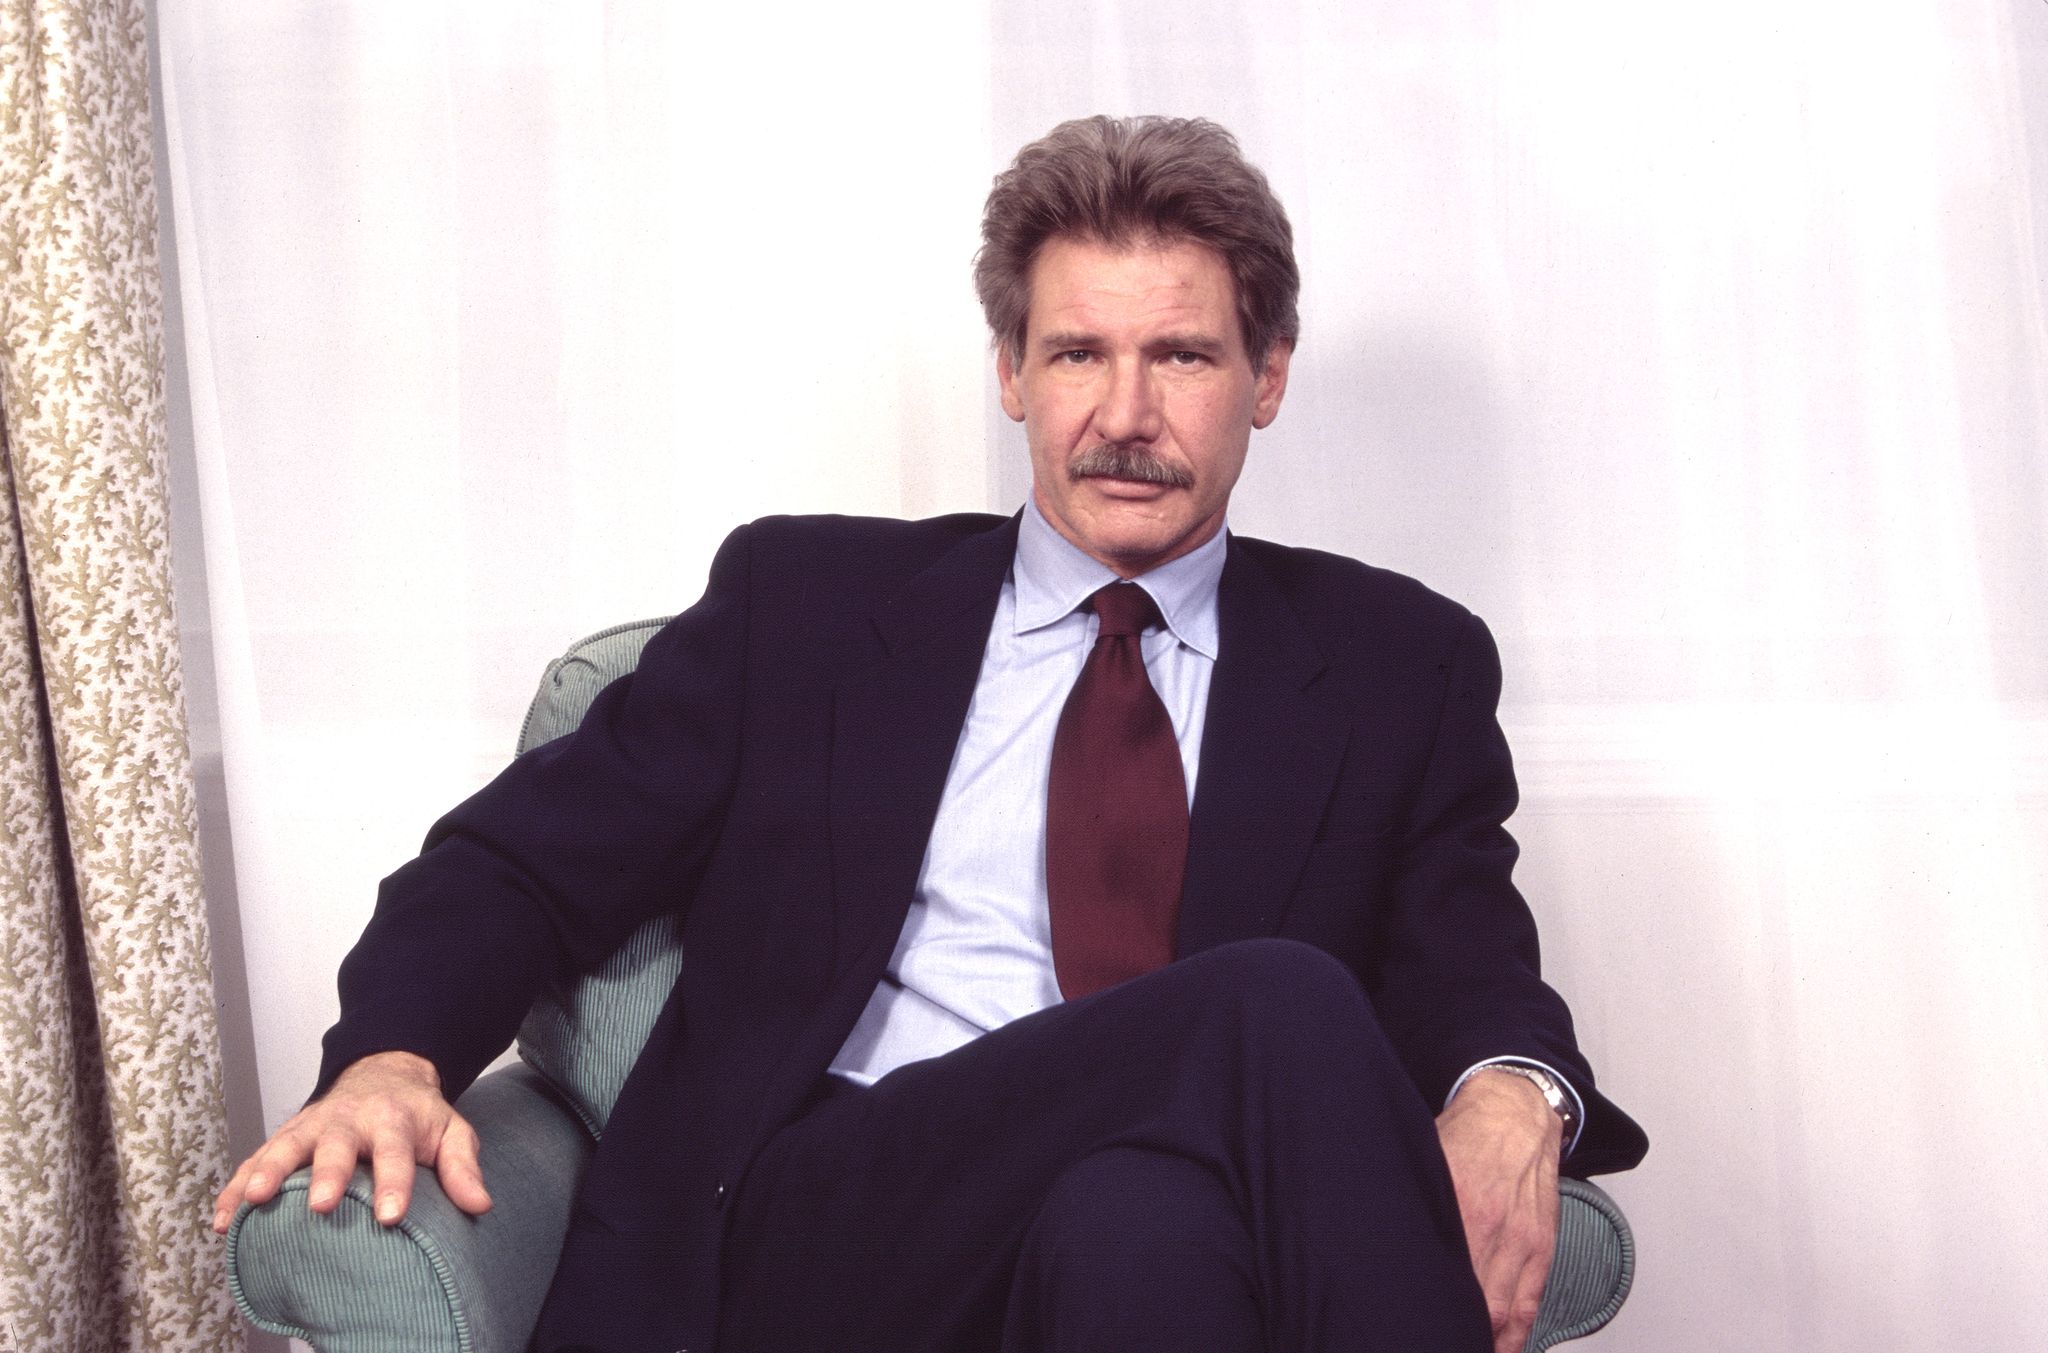 portrait of american actor harrison ford at the essex house, new york, new york, november 20, 1995 he was there during a press junket for his film sabrina directed by sydney pollack photo by gary gershoffgetty images